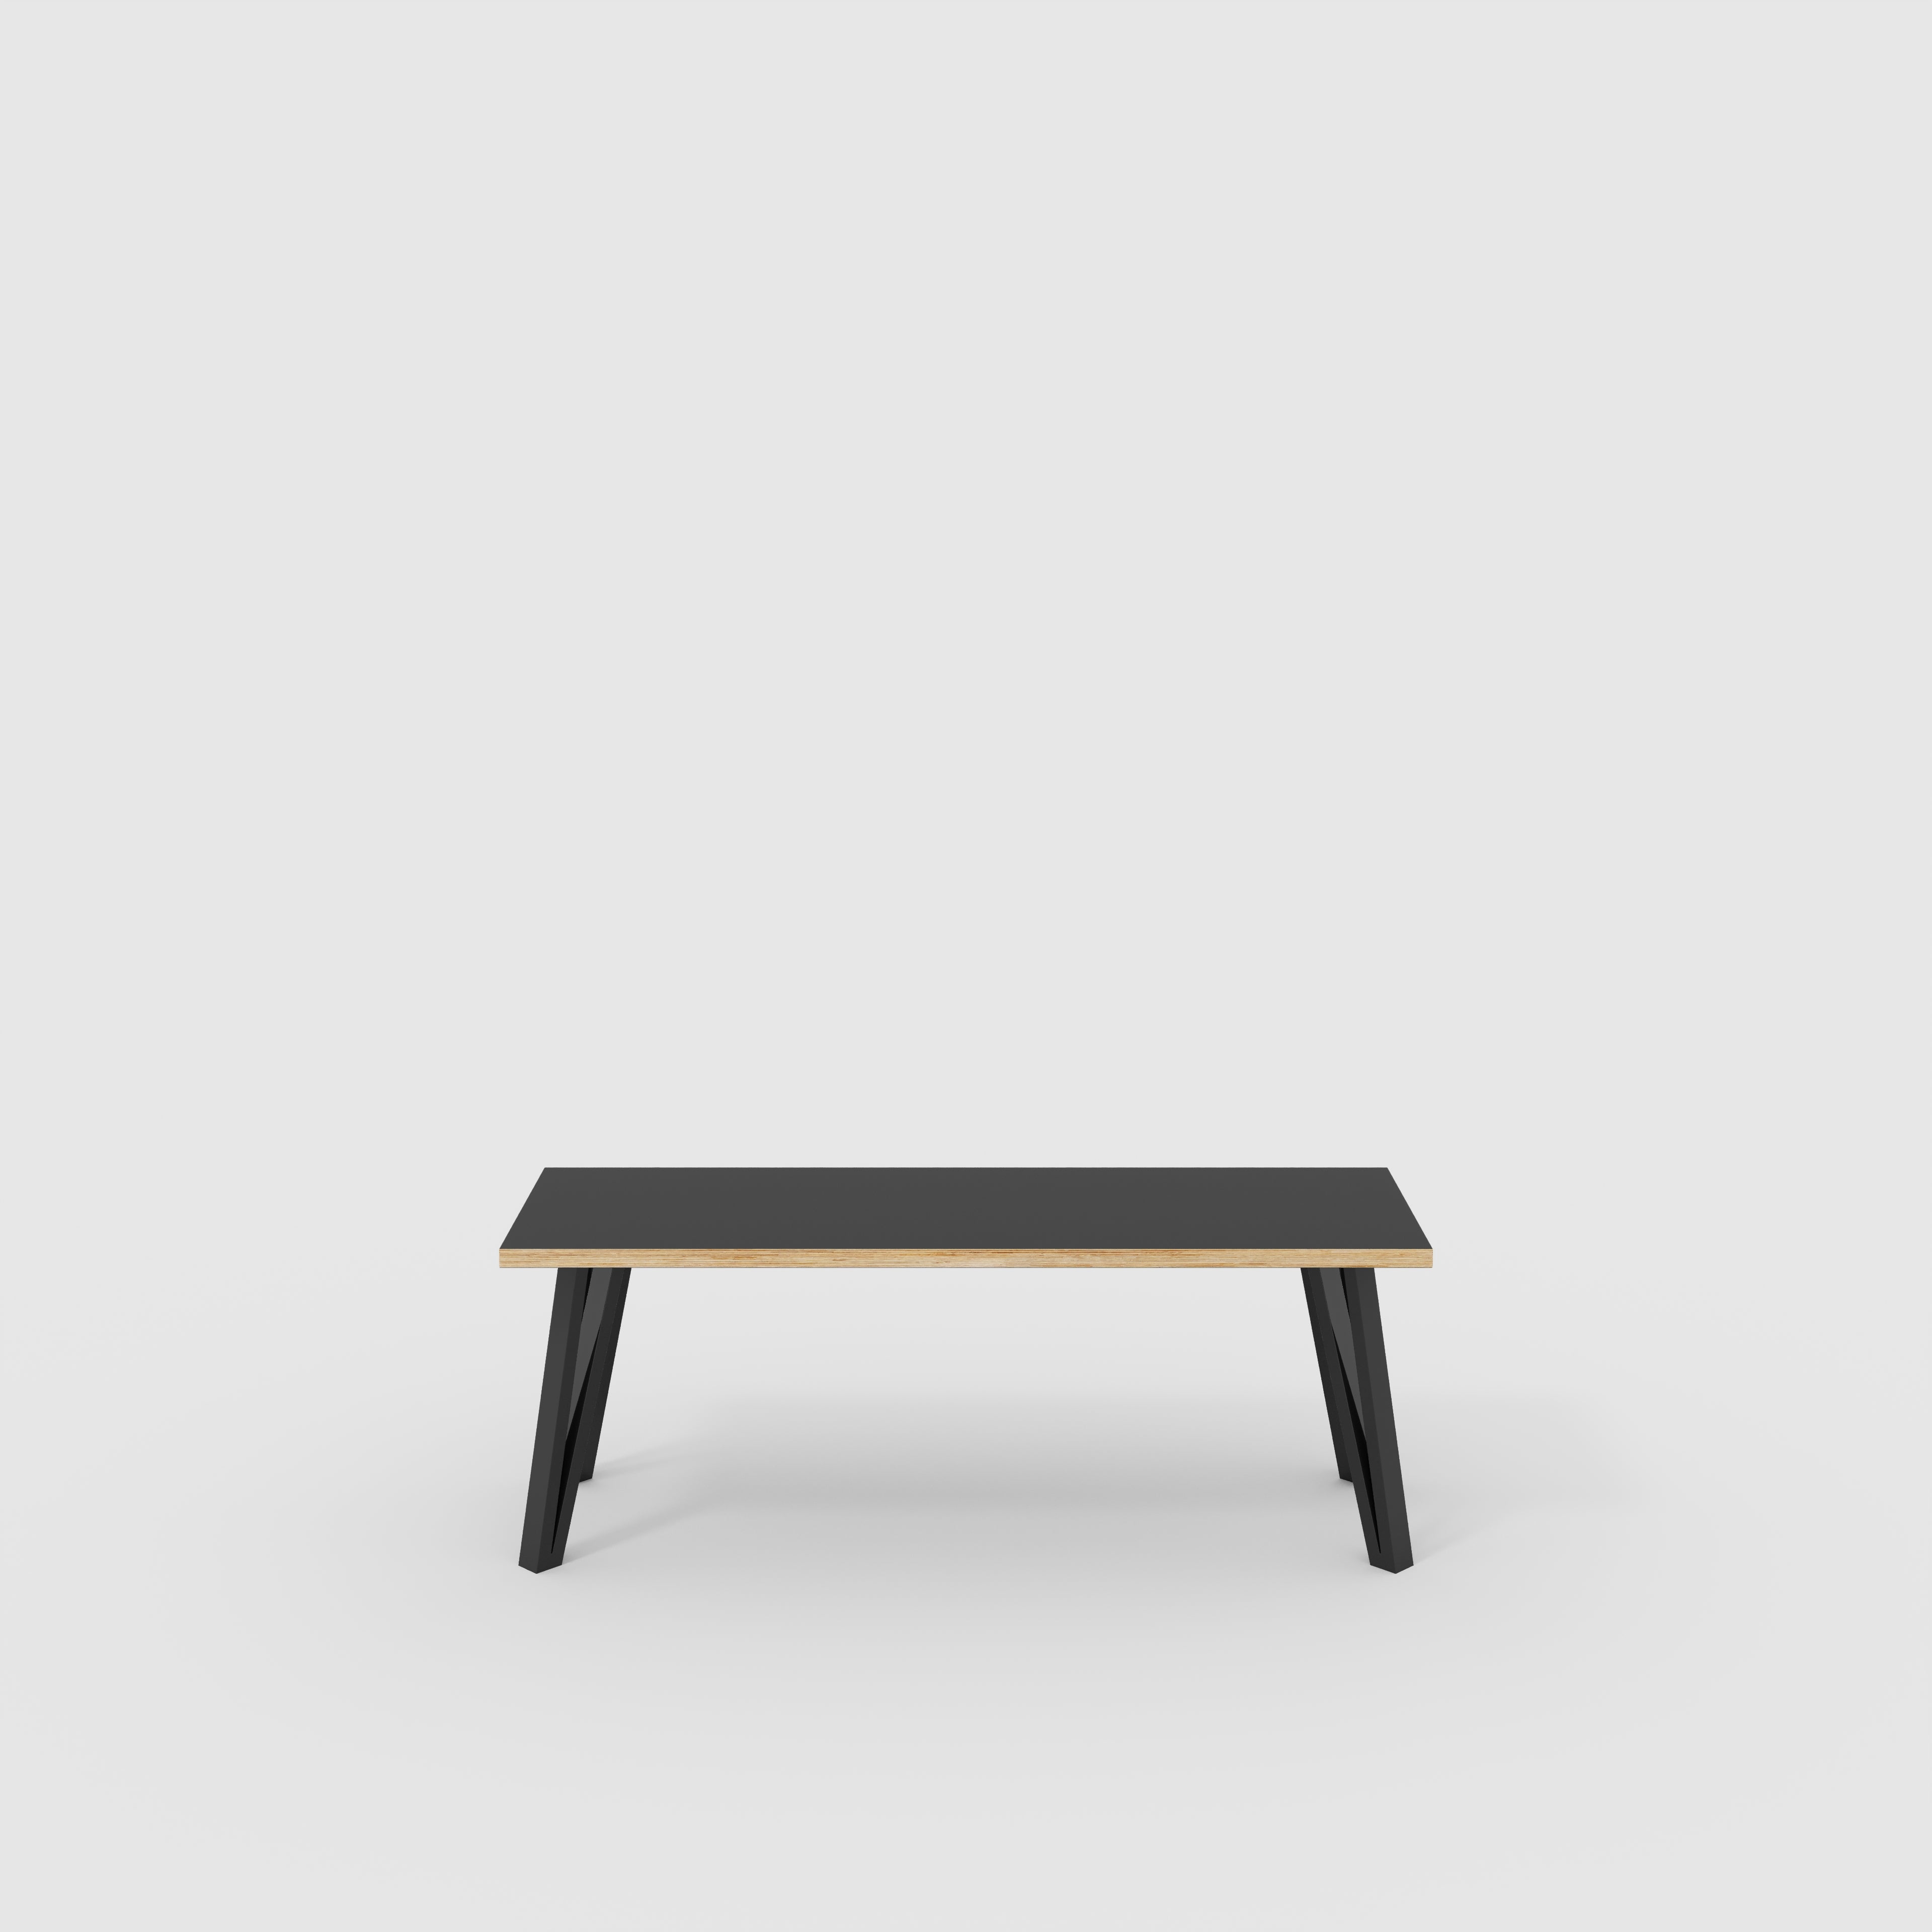 Bench Seat with Black Box Hairpin Legs - Formica Diamond Black - 1200(w) x 400(d) x 450(h)